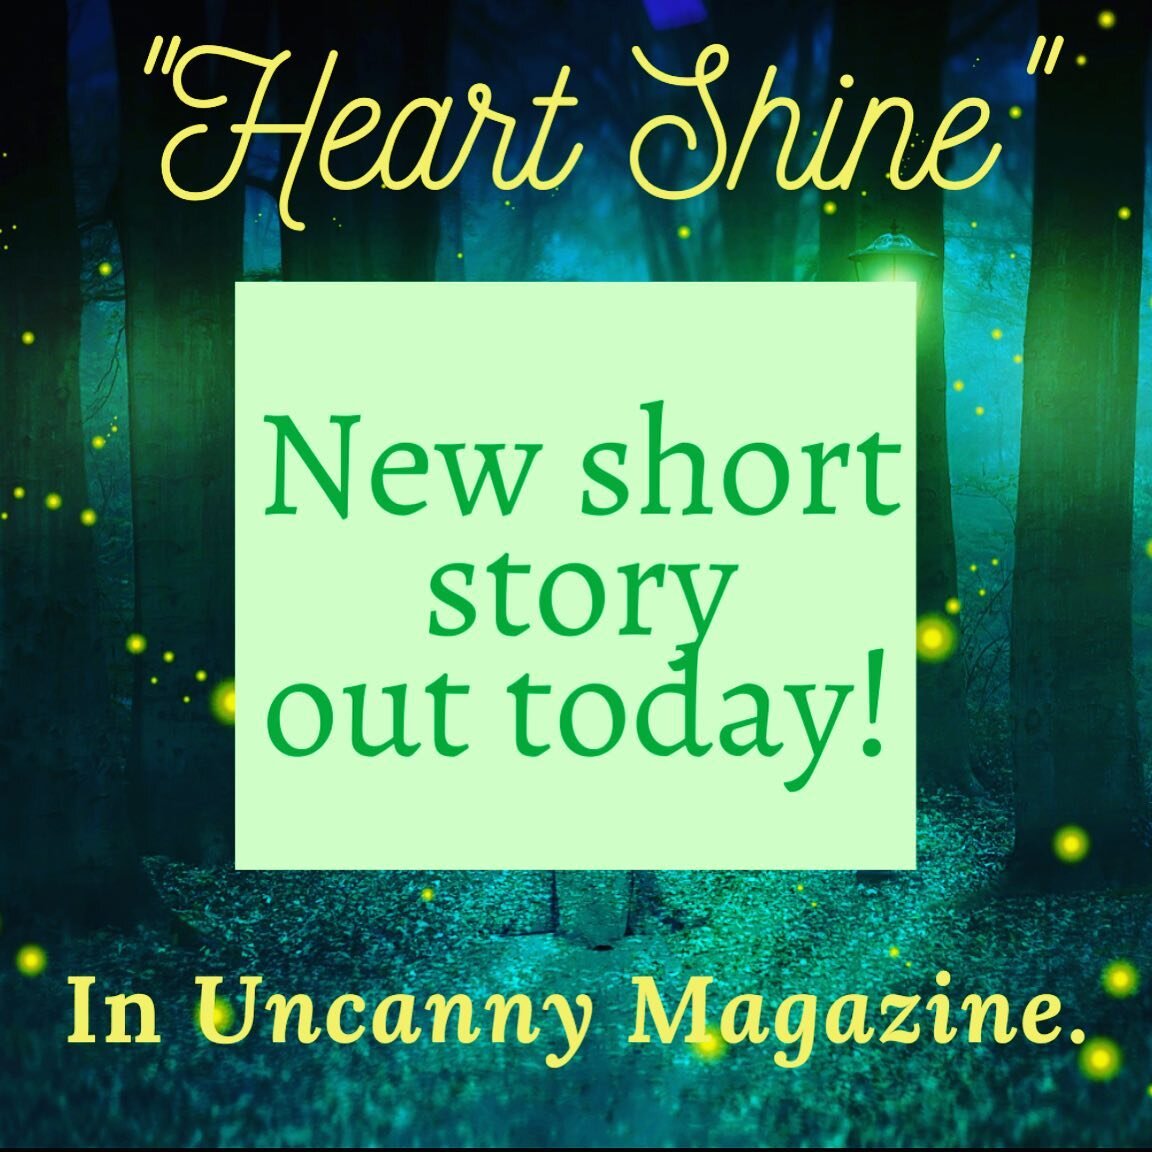 Happy June, the month of june bugs, or fireflies, which is perfect, since the first short story I&rsquo;ve written in a couple of years&mdash;which features fireflies&mdash;is out today in @uncanny_magazine! (The link to read it is in my bio.)

It&rs